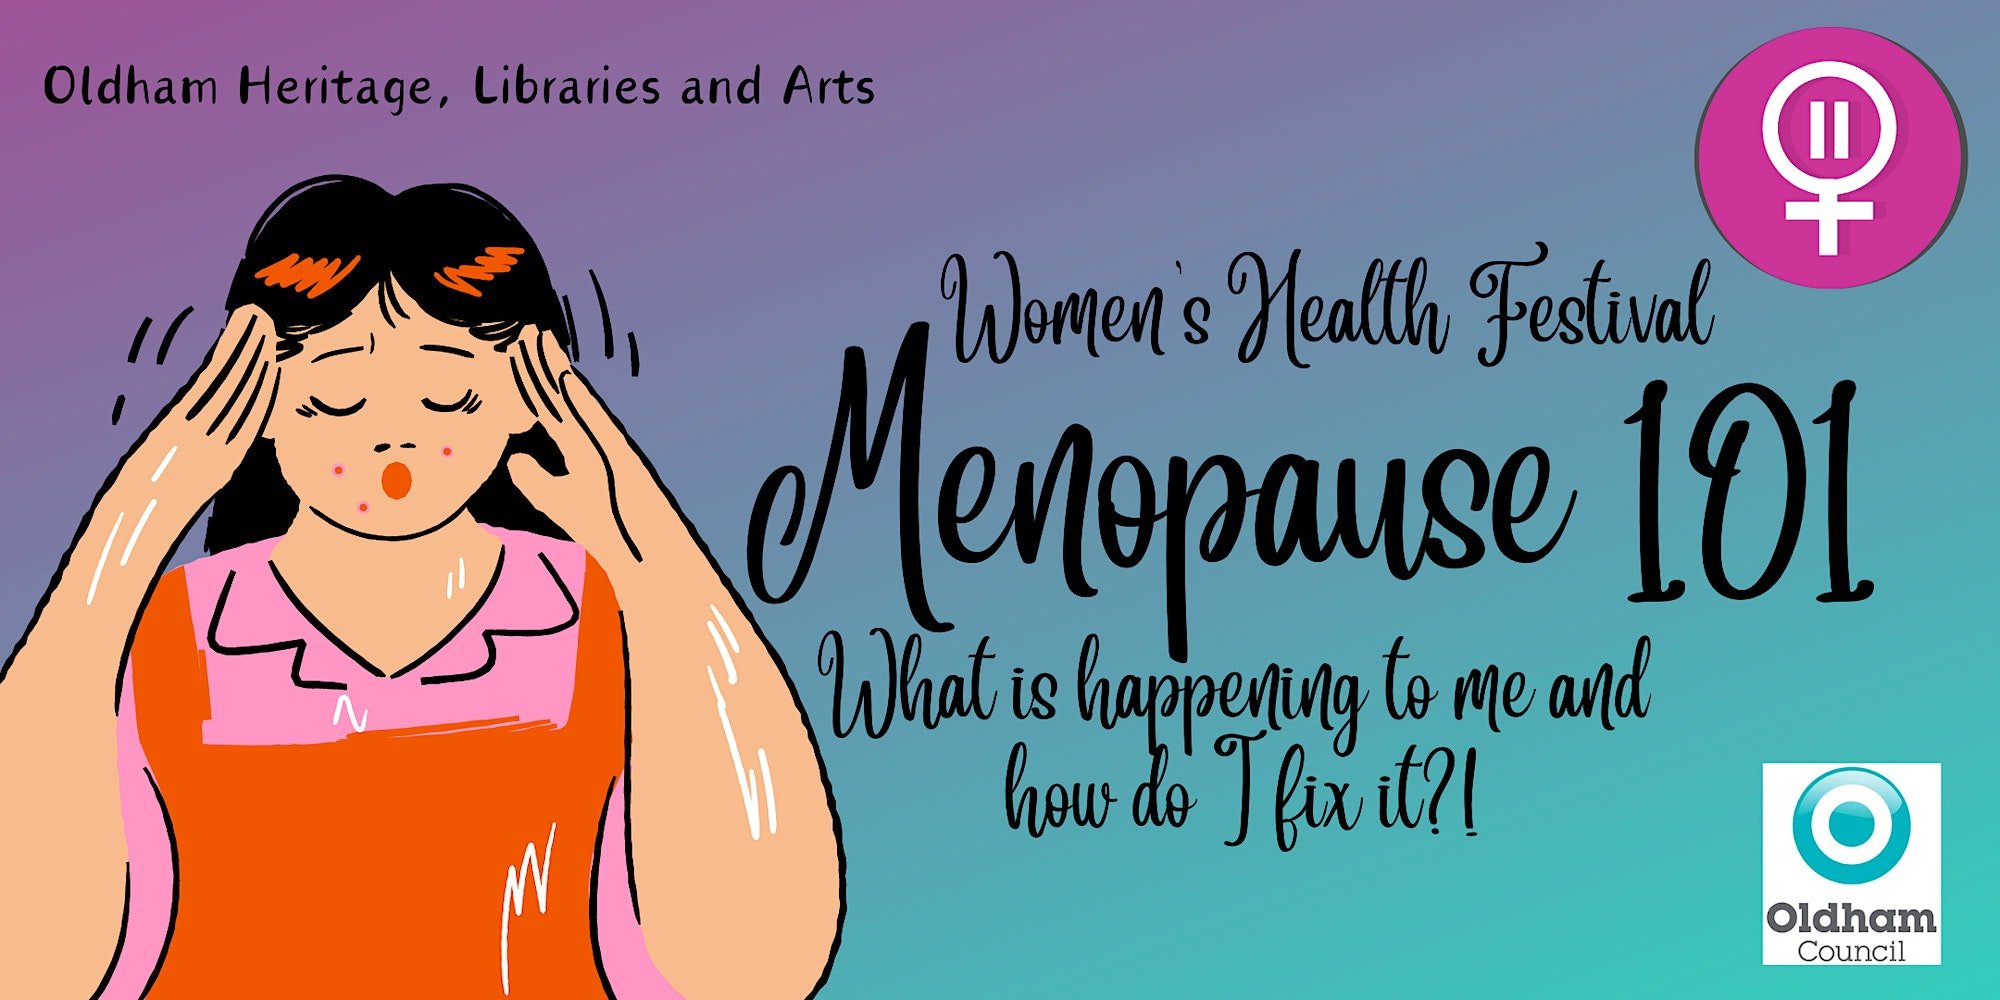 Woman's Health Festival, Menopause 101. What is happening to me and how do I fix it?!